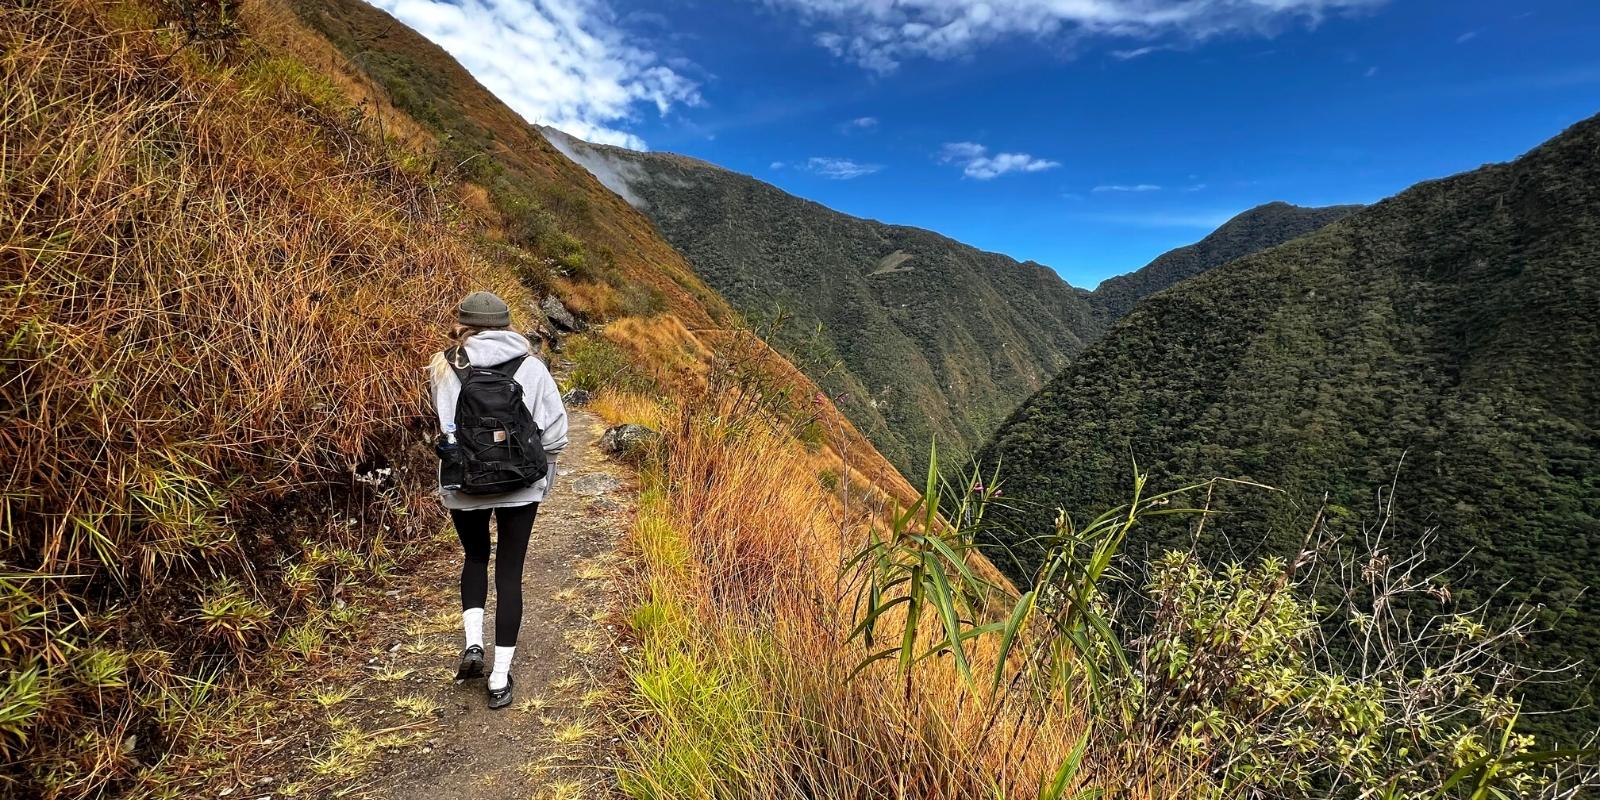 HOW LONG IS THE SHORT INCA TRAIL HIKE?